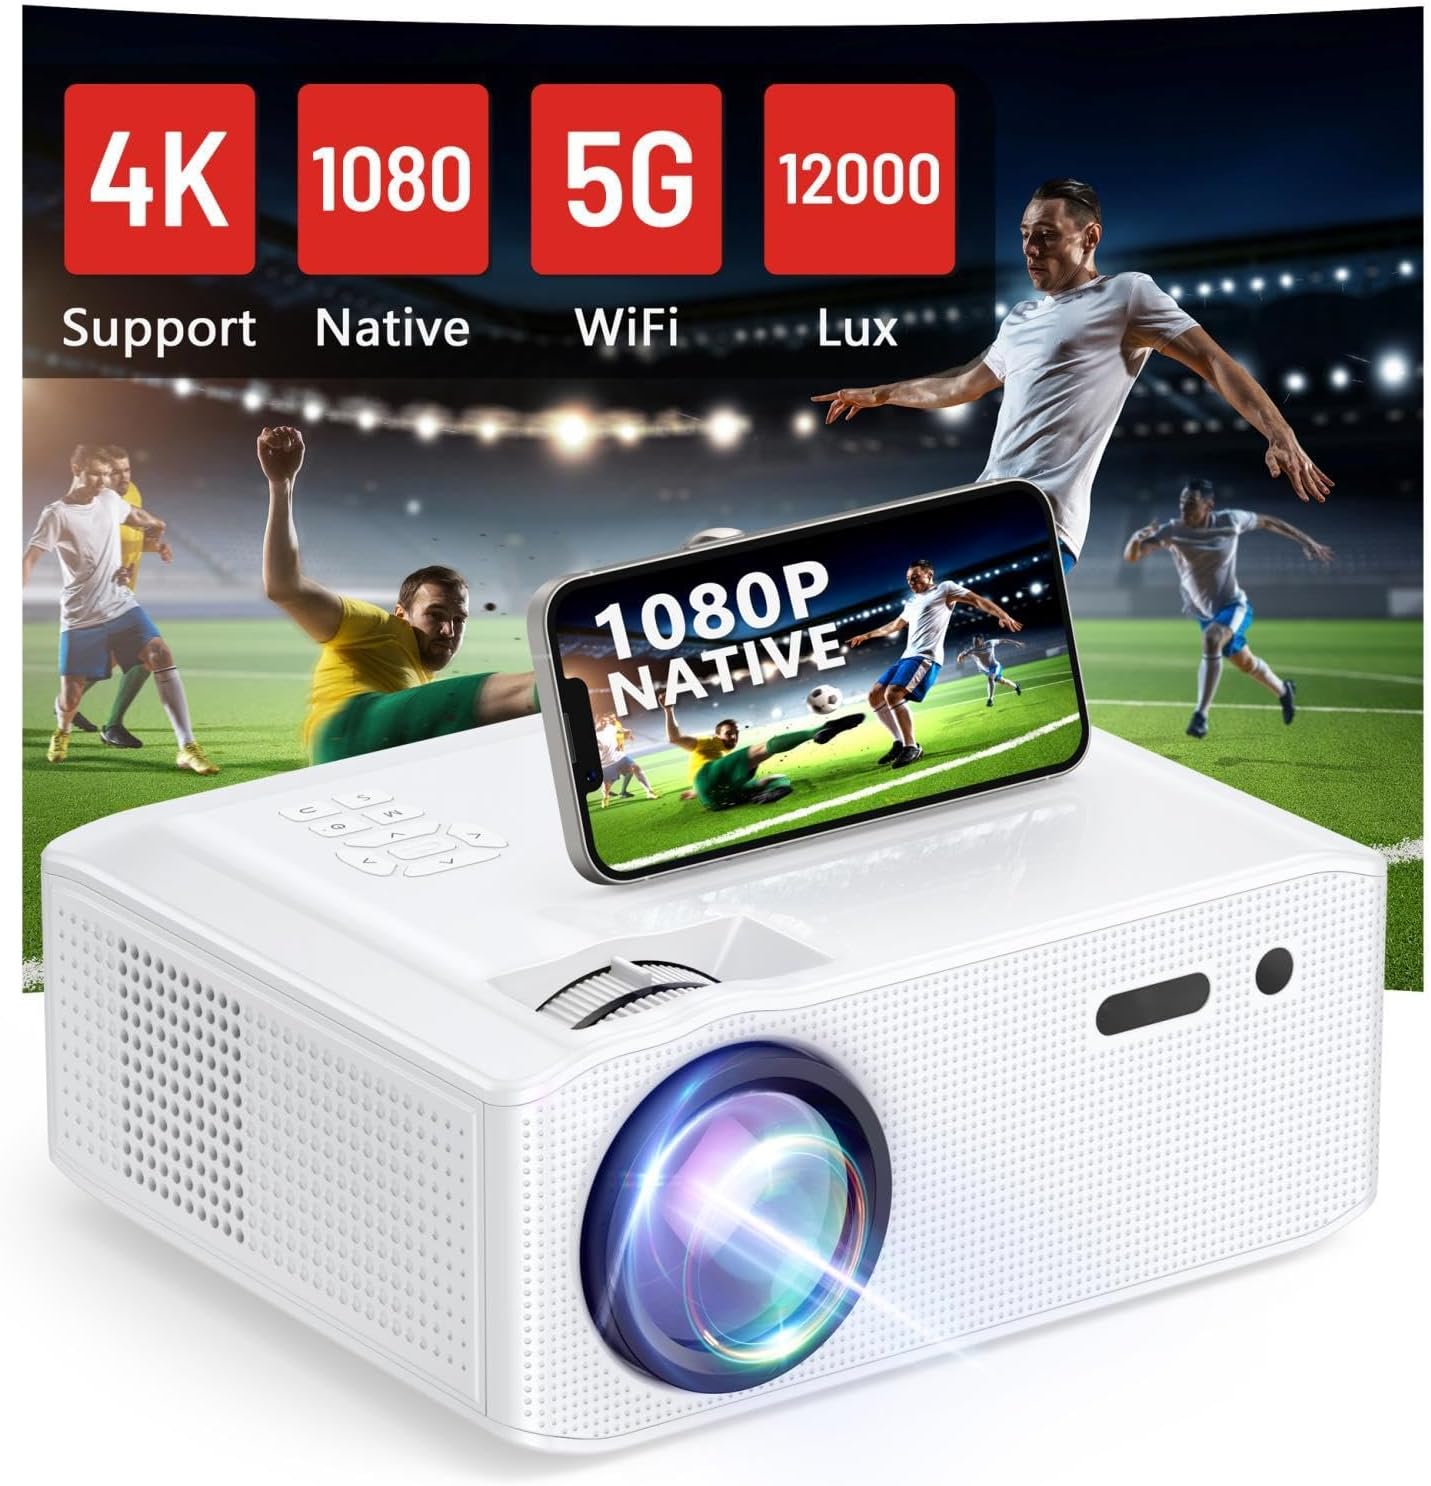 TaoTronics Projector 4K with WiFi and Bluetooth Supported, MiTecHPro 450 ANSI Portable Movie Projector, with Zoom Function and Timer Shutdown, FHD 1080P Outdoor Projector